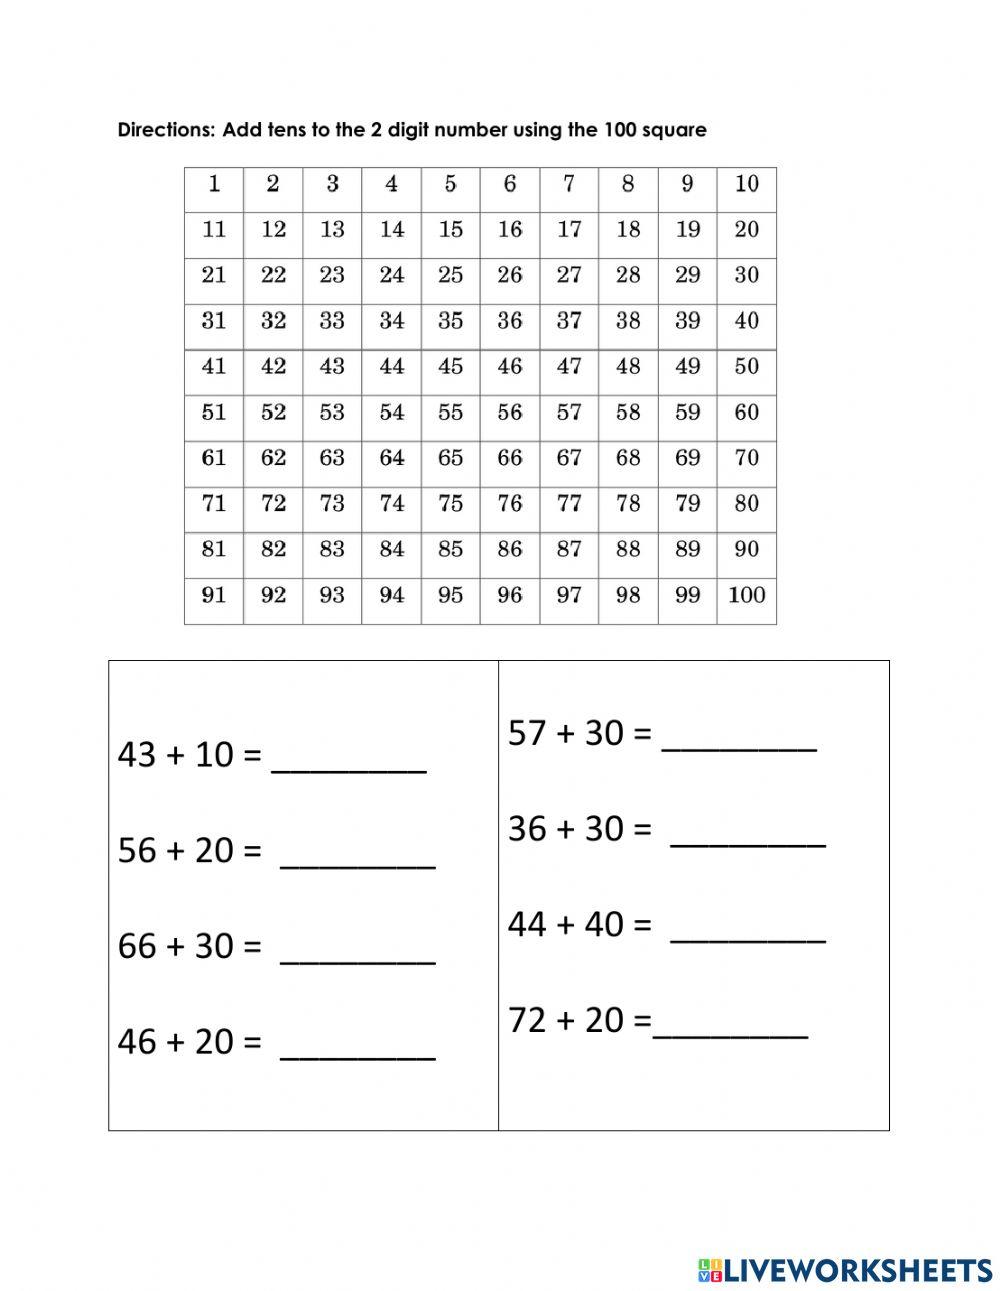 Addition tens to two digit numbers using 100 square